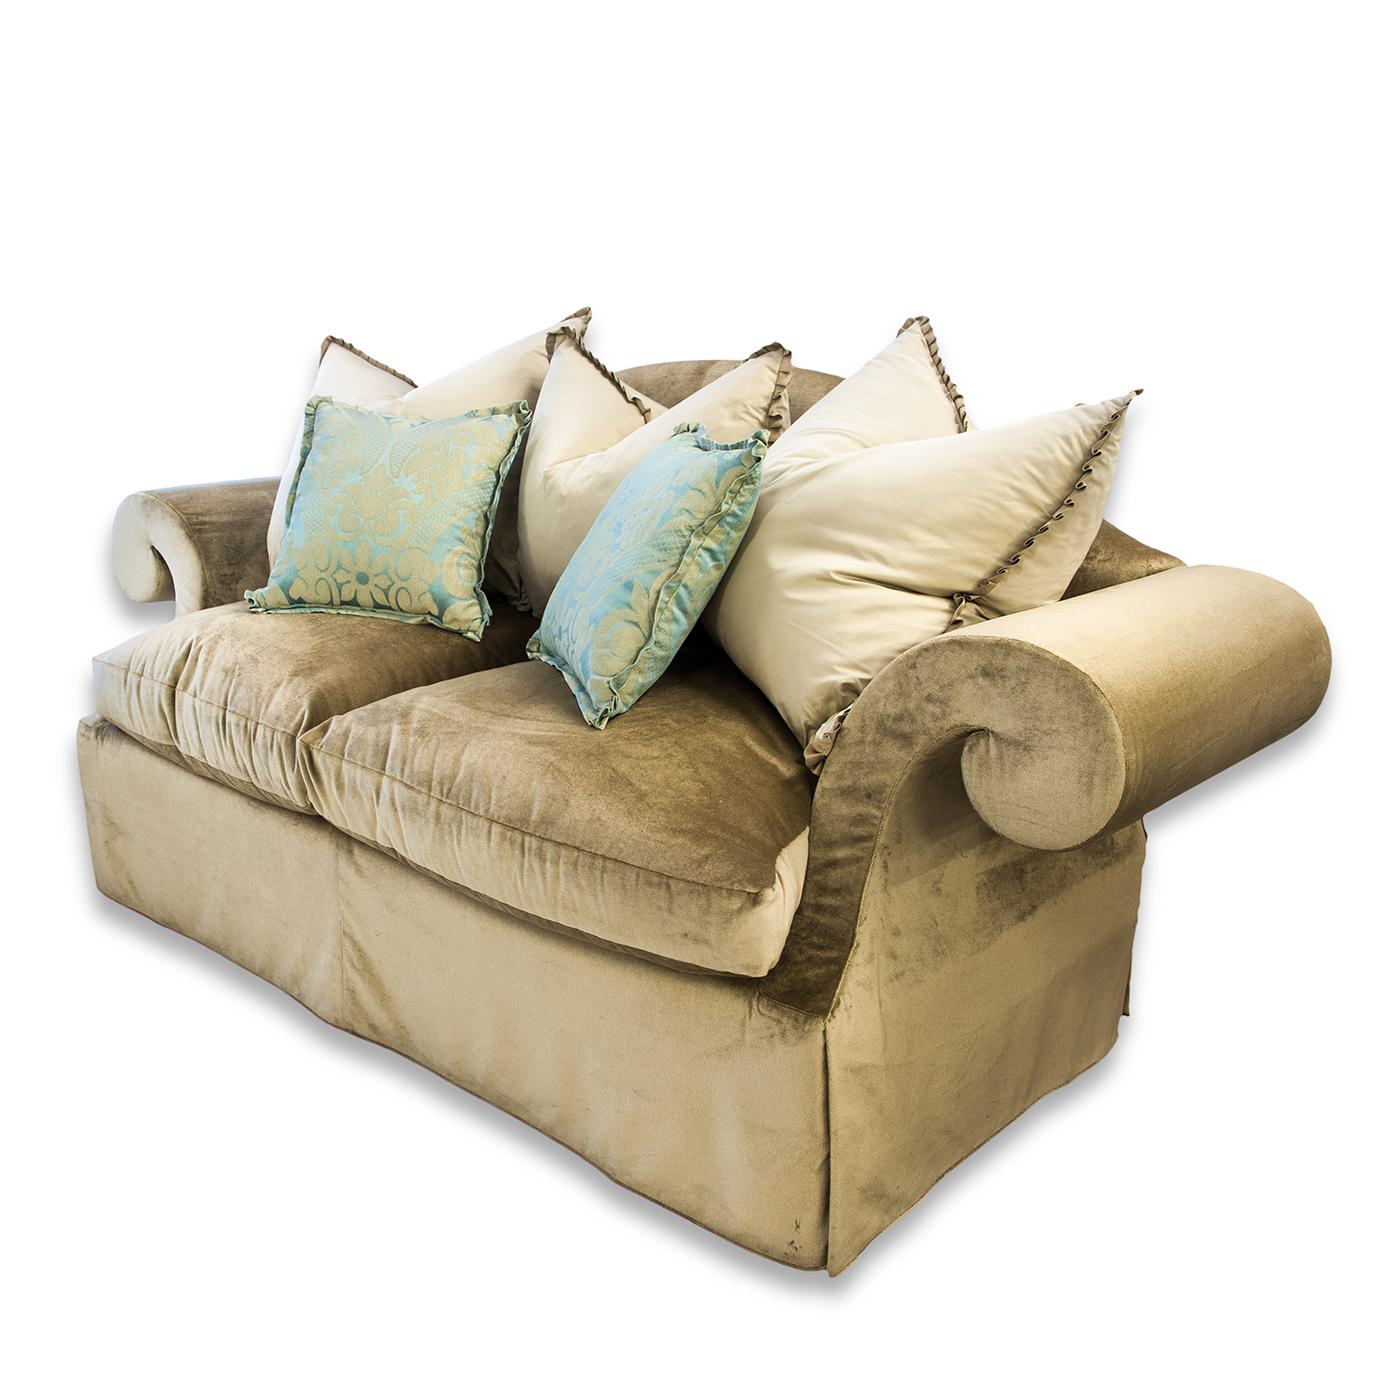 Introducing the La Salute sofa, a cozy and eye-catching addition to your living area. With its inviting round shapes and beautiful taupe velvet upholstery, this sofa combines comfort with style. It is possible to choose any fabric, allowing for